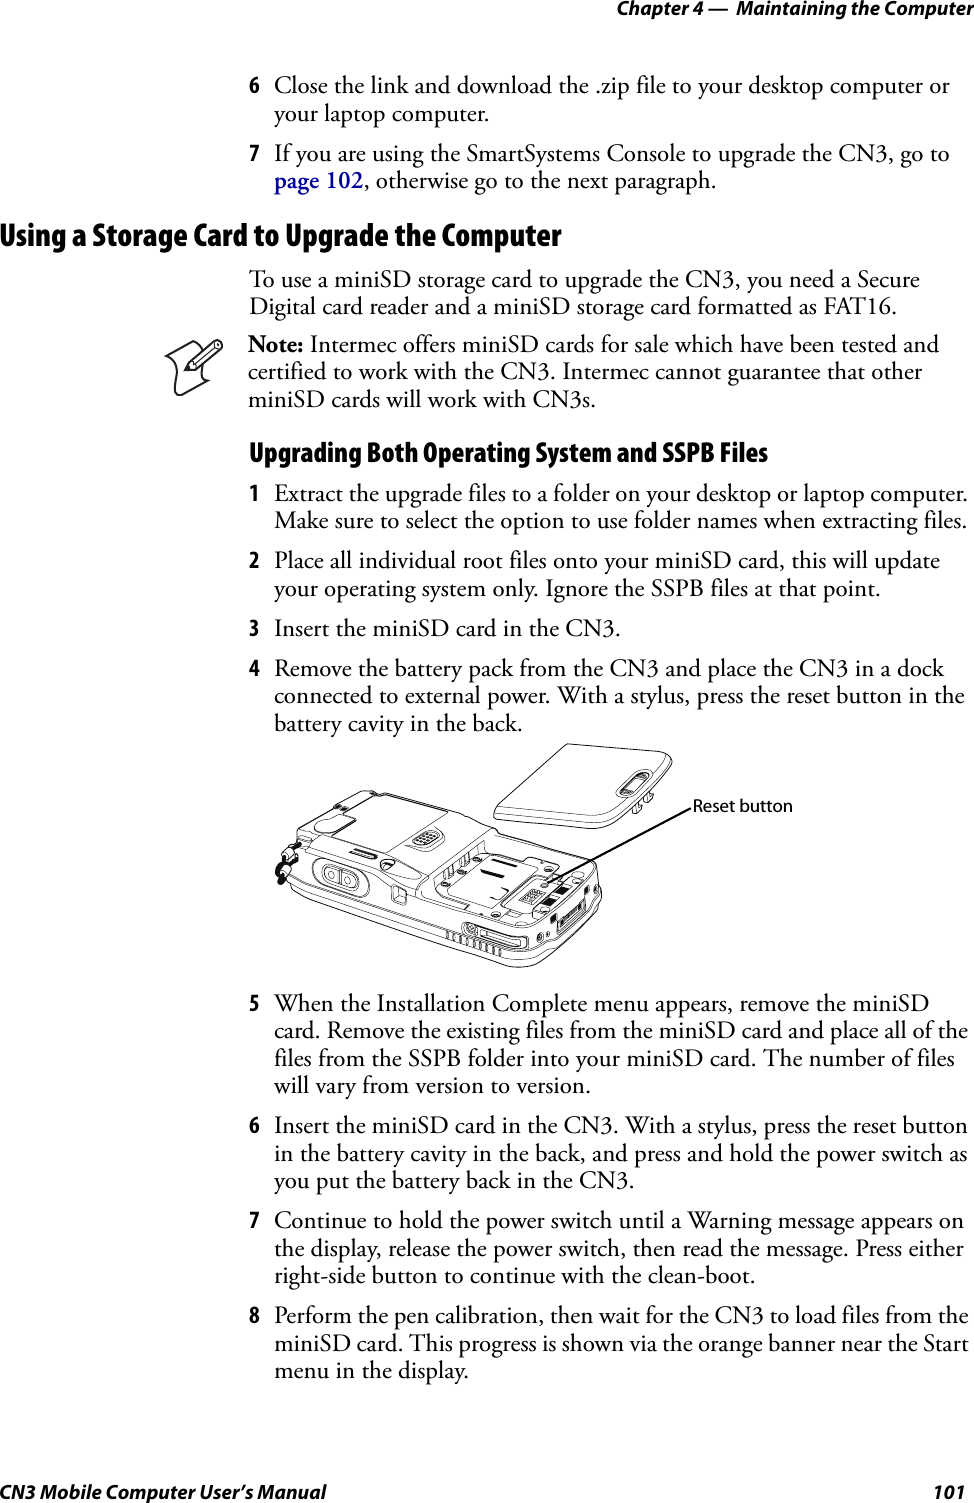 Chapter 4 —  Maintaining the ComputerCN3 Mobile Computer User’s Manual 1016Close the link and download the .zip file to your desktop computer or your laptop computer.7If you are using the SmartSystems Console to upgrade the CN3, go to page 102, otherwise go to the next paragraph.Using a Storage Card to Upgrade the ComputerTo use a miniSD storage card to upgrade the CN3, you need a Secure Digital card reader and a miniSD storage card formatted as FAT16.Upgrading Both Operating System and SSPB Files1Extract the upgrade files to a folder on your desktop or laptop computer. Make sure to select the option to use folder names when extracting files.2Place all individual root files onto your miniSD card, this will update your operating system only. Ignore the SSPB files at that point.3Insert the miniSD card in the CN3.4Remove the battery pack from the CN3 and place the CN3 in a dock connected to external power. With a stylus, press the reset button in the battery cavity in the back.5When the Installation Complete menu appears, remove the miniSD card. Remove the existing files from the miniSD card and place all of the files from the SSPB folder into your miniSD card. The number of files will vary from version to version.6Insert the miniSD card in the CN3. With a stylus, press the reset button in the battery cavity in the back, and press and hold the power switch as you put the battery back in the CN3.7Continue to hold the power switch until a Warning message appears on the display, release the power switch, then read the message. Press either right-side button to continue with the clean-boot.8Perform the pen calibration, then wait for the CN3 to load files from the miniSD card. This progress is shown via the orange banner near the Start menu in the display. Note: Intermec offers miniSD cards for sale which have been tested and certified to work with the CN3. Intermec cannot guarantee that other miniSD cards will work with CN3s.Reset button